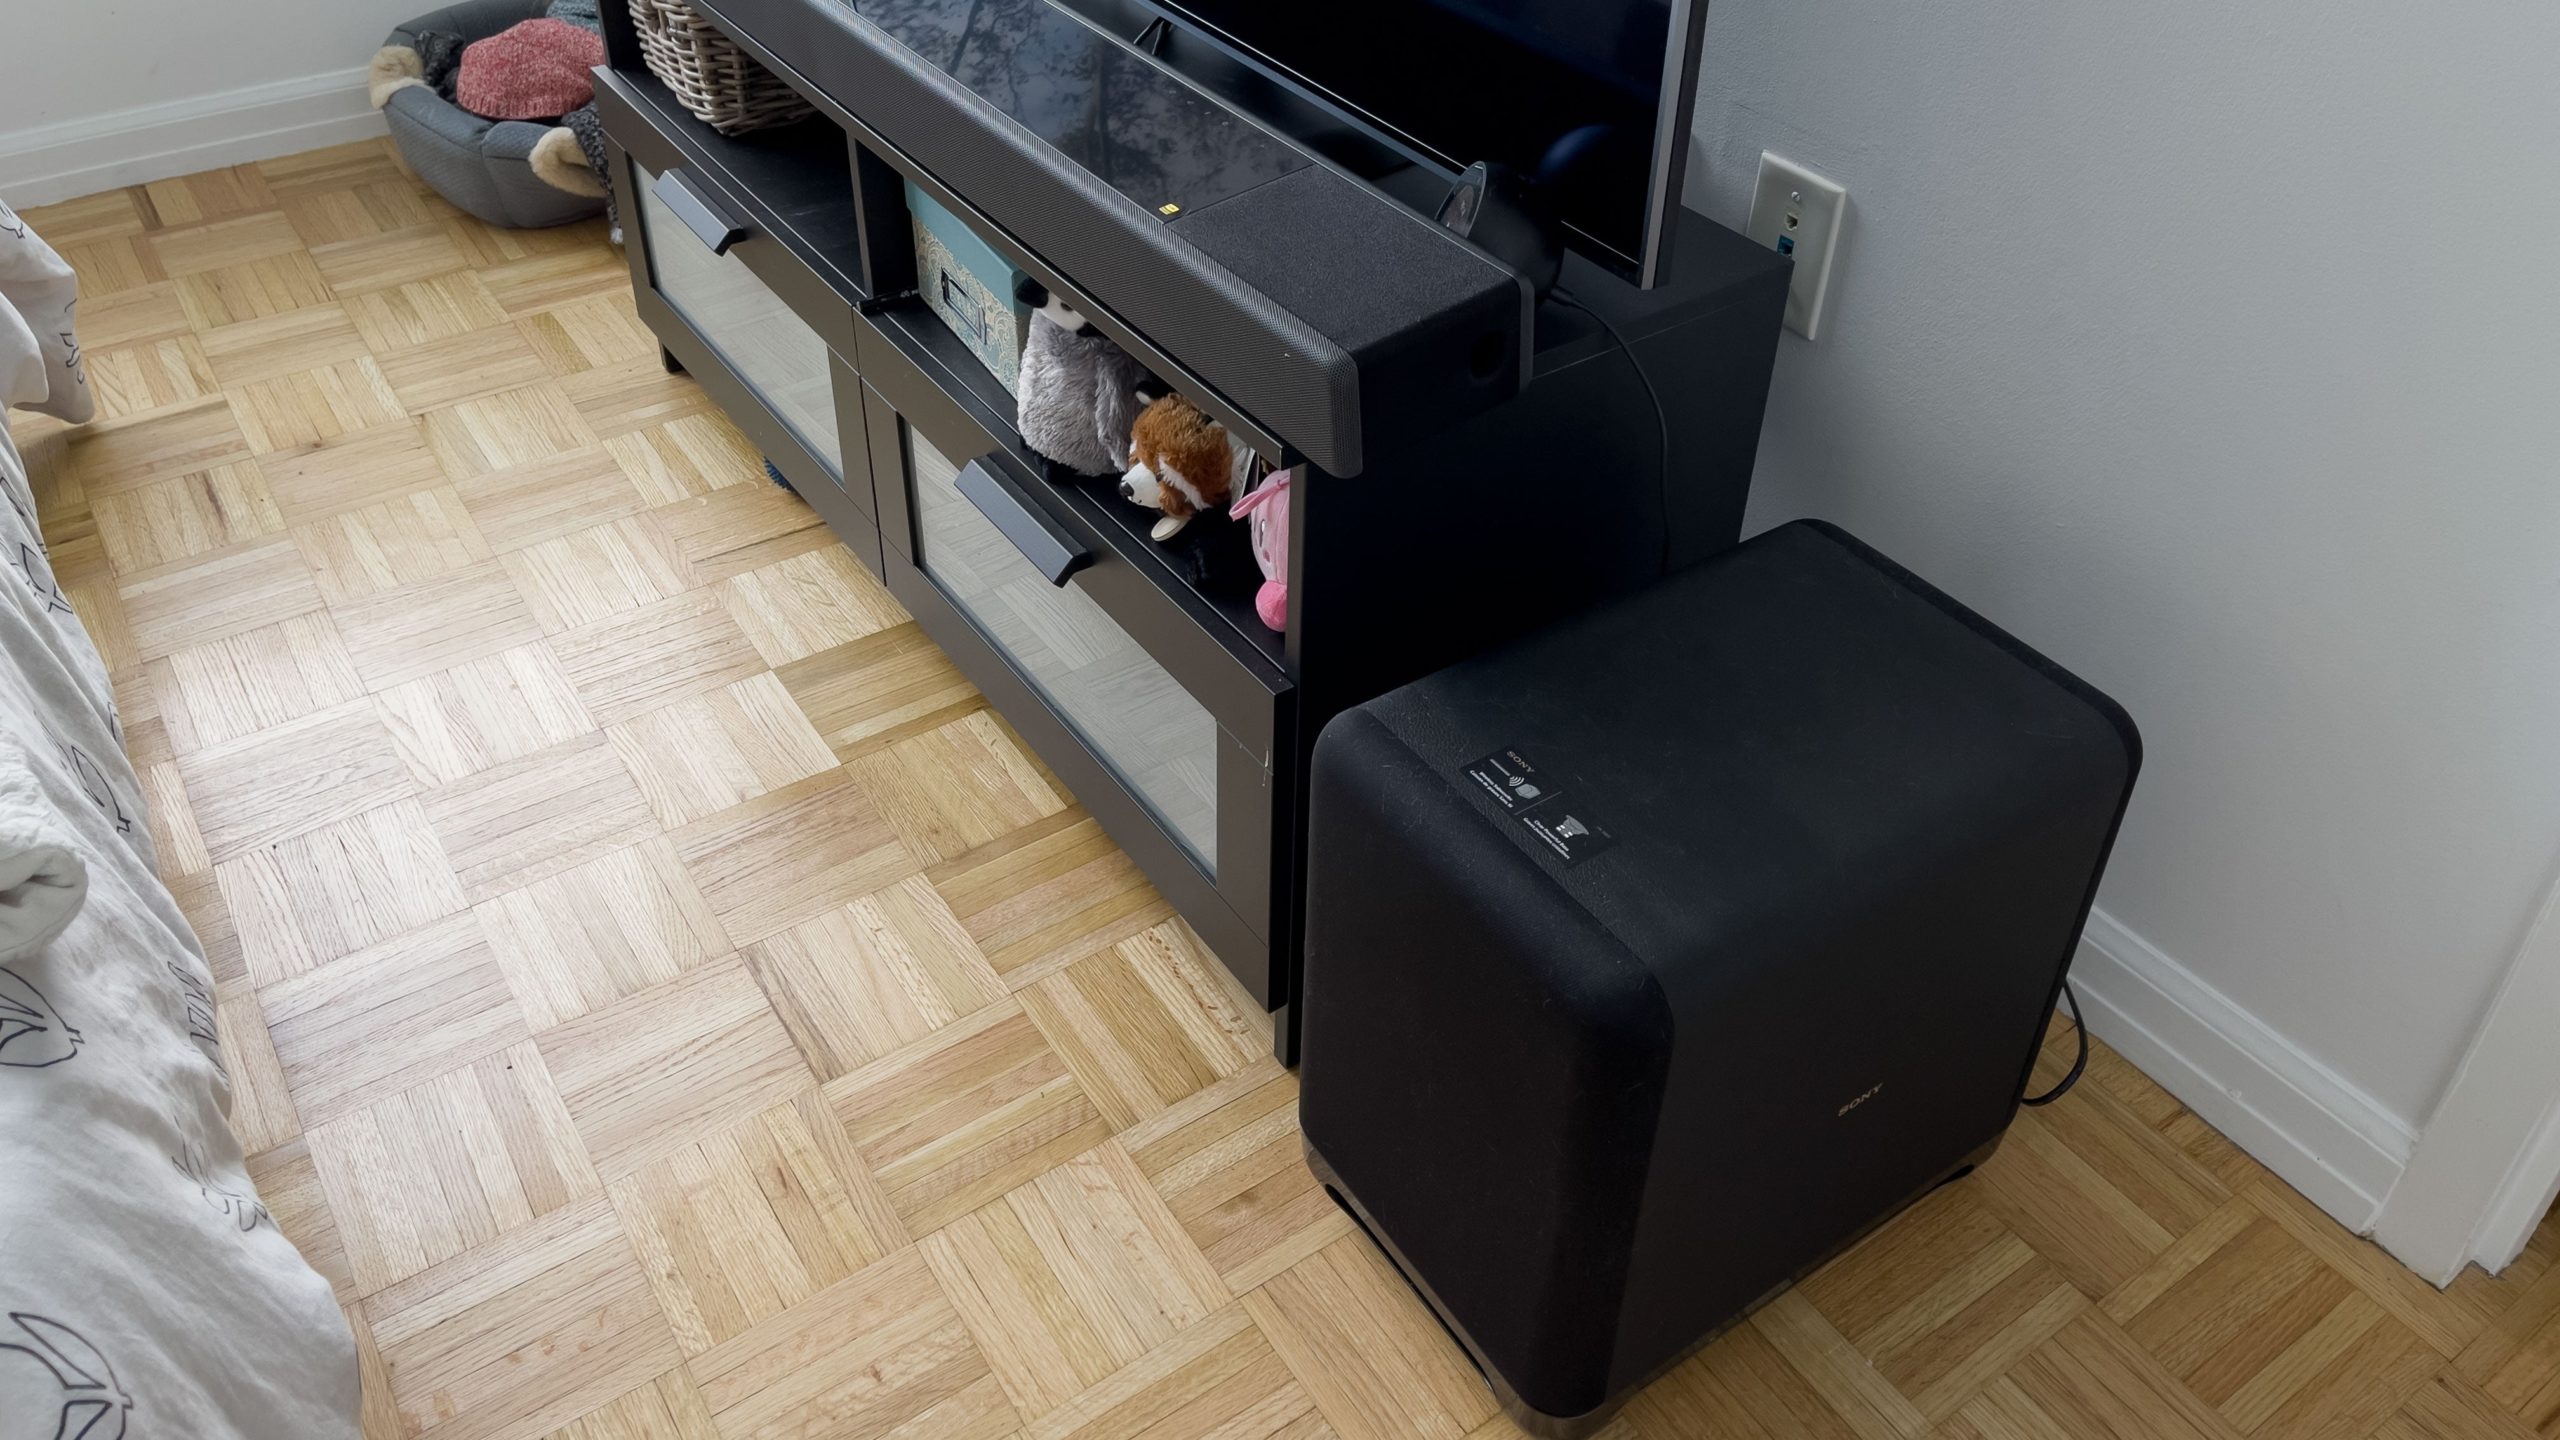 This subwoofer costs an extra $US700 ($947). (Photo: Victoria Song/Gizmodo)